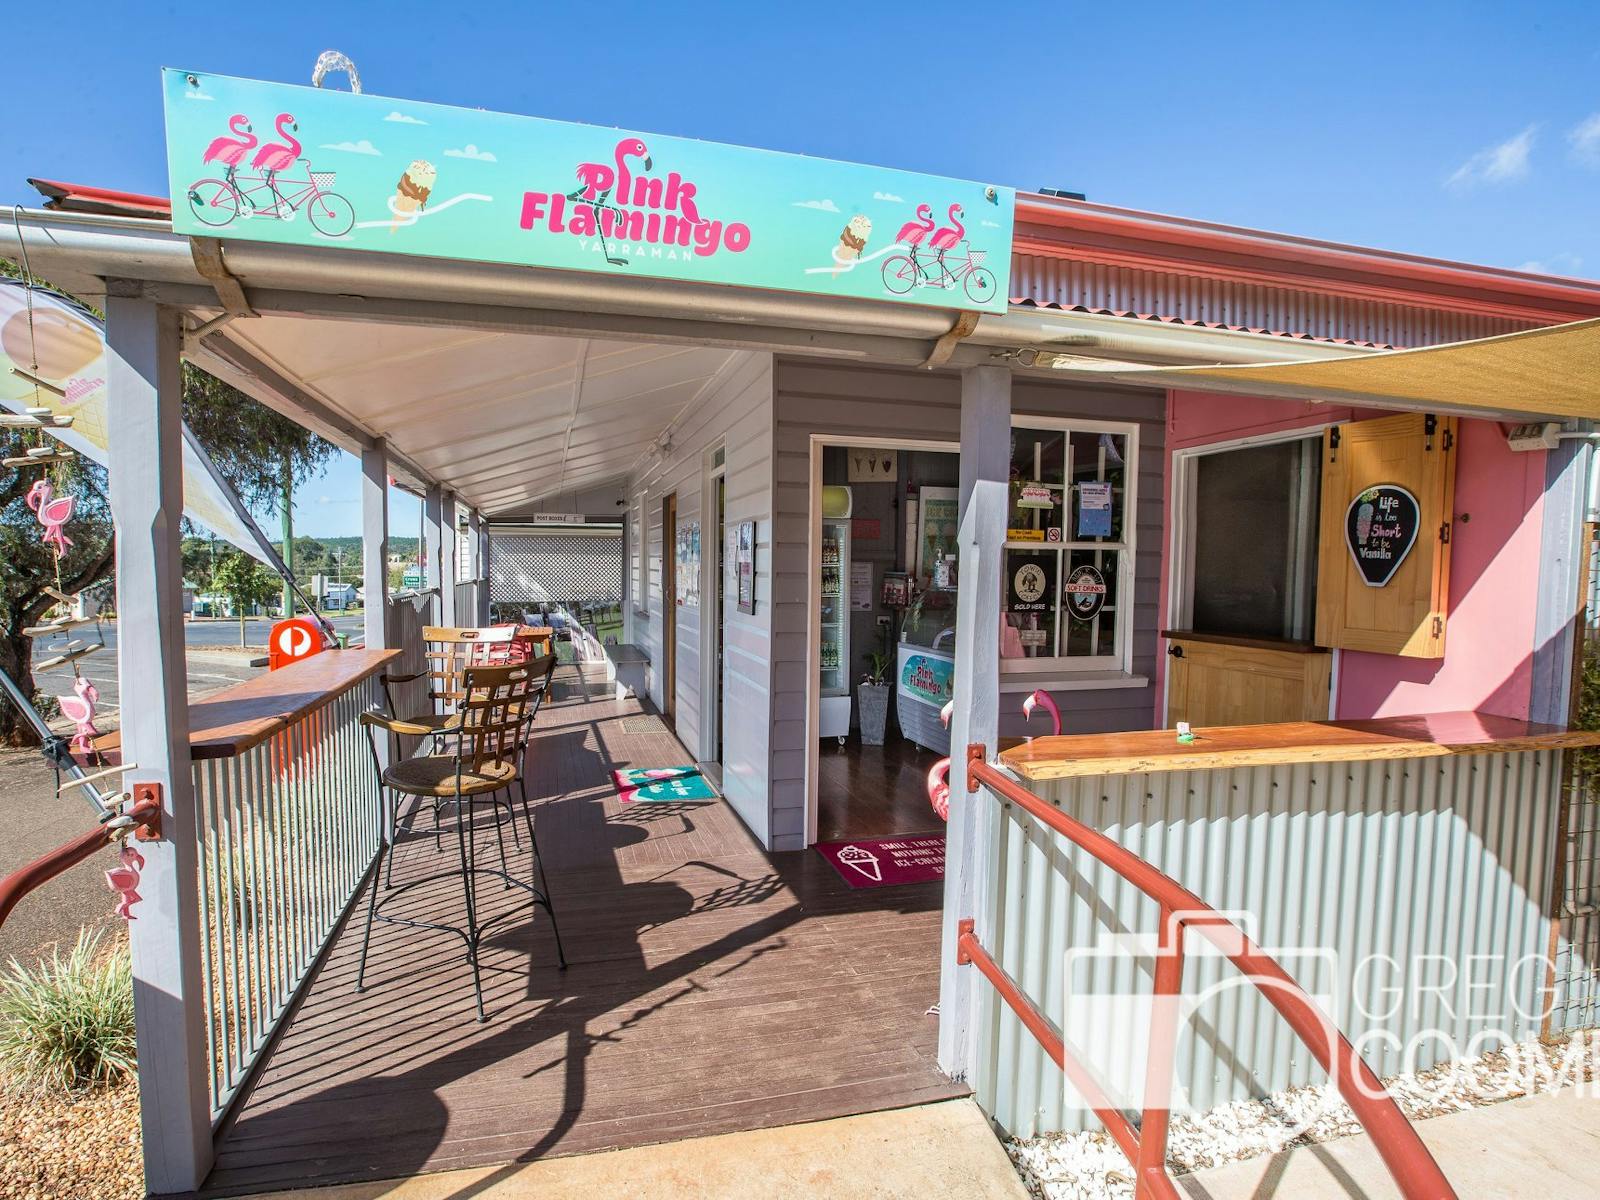 This is the front entrance to Pink Flamingo Yarraman